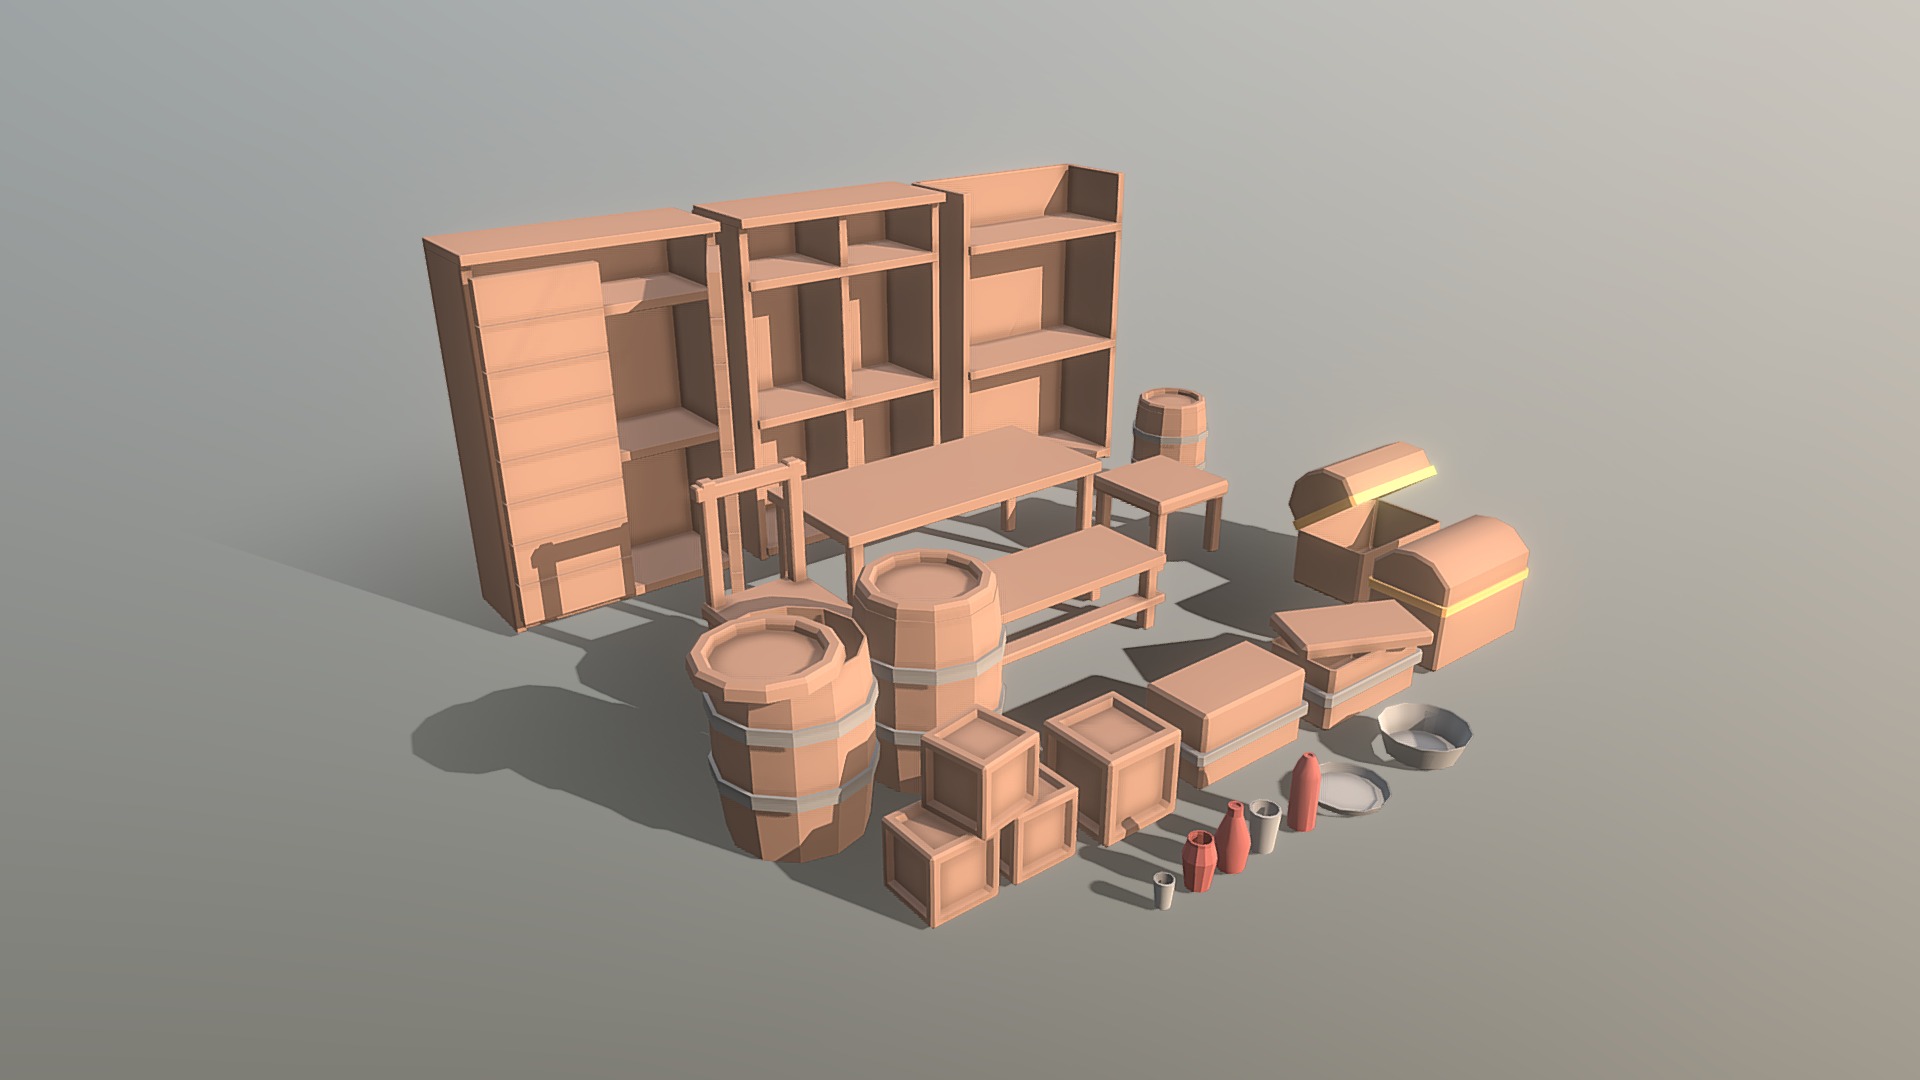 3D model Fantasy Dungeon Assets Pack - This is a 3D model of the Fantasy Dungeon Assets Pack. The 3D model is about a group of boxes stacked on top of each other.